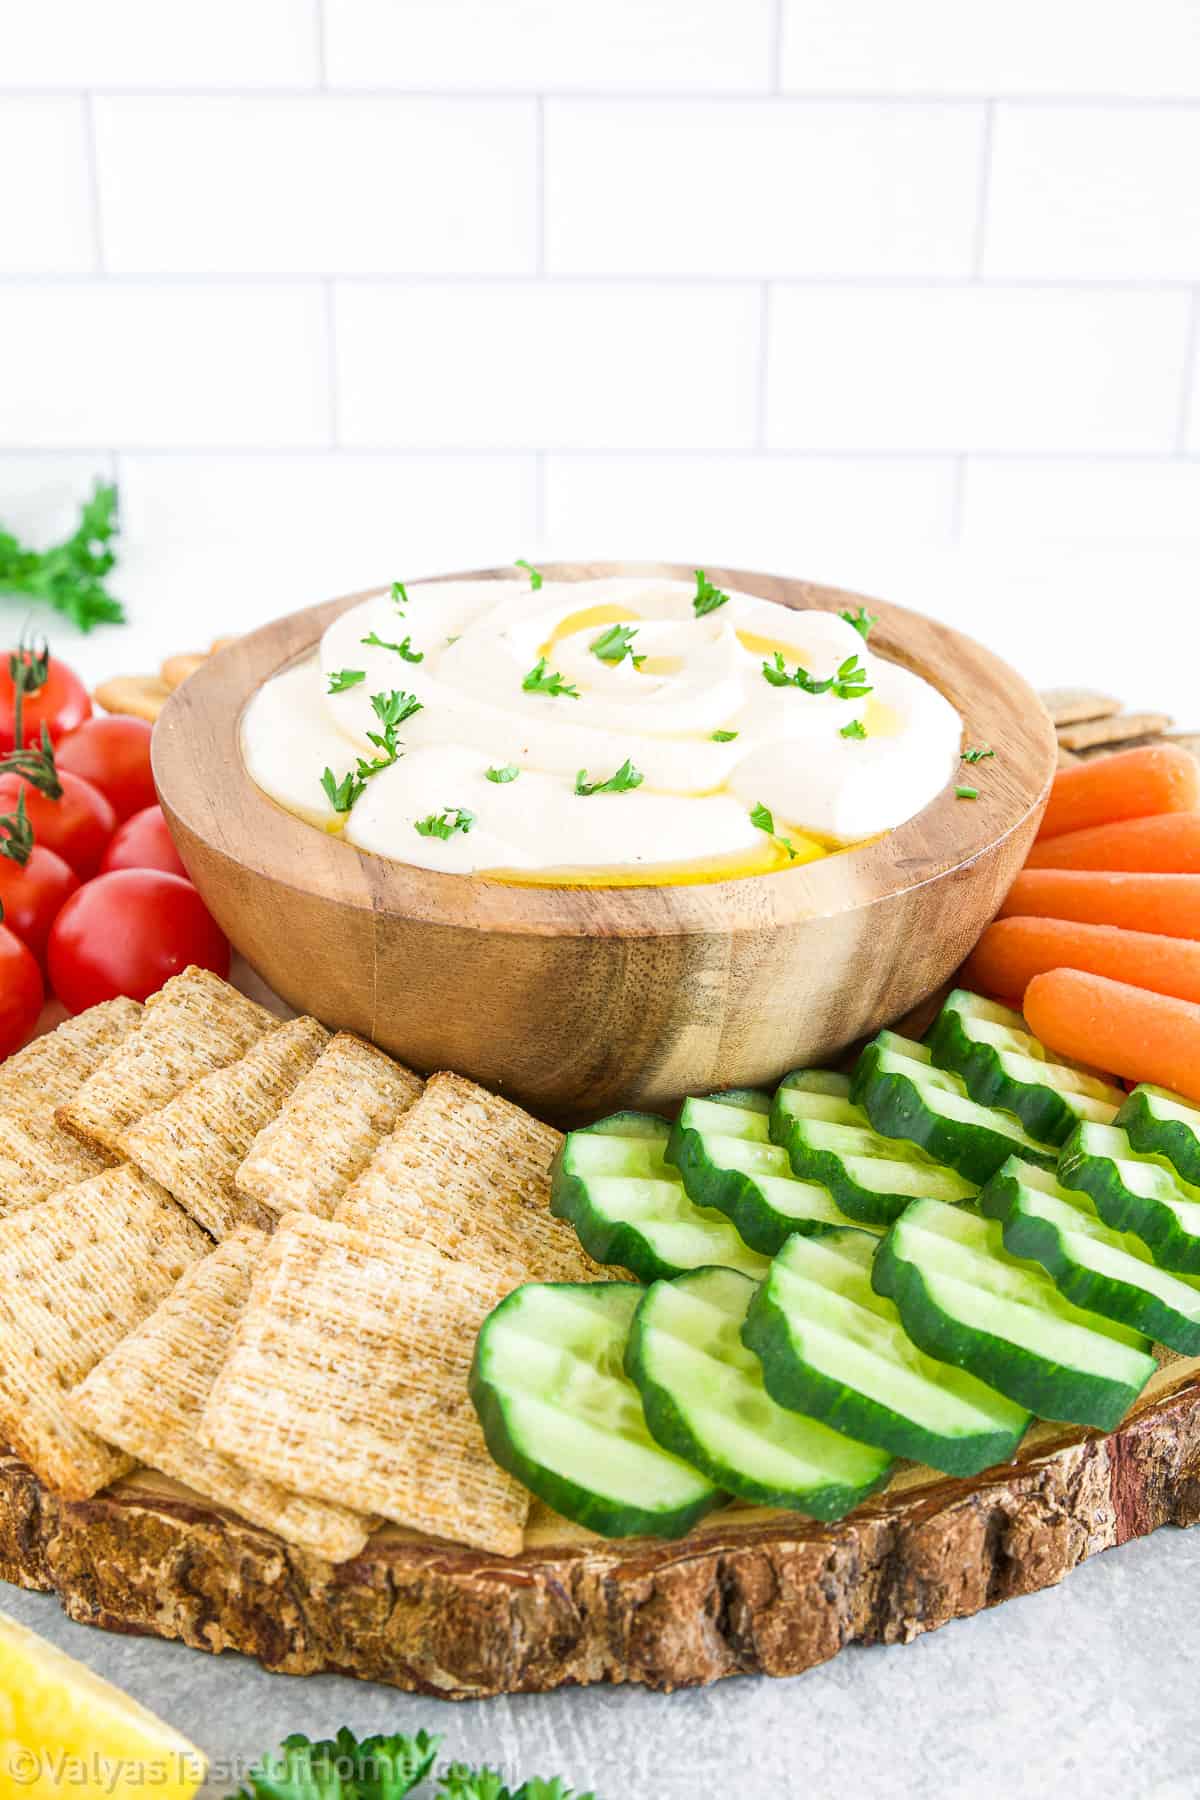 This 5-minute Whipped Feta Dip is a game-changer for your party menu. Incredibly versatile, it's a blend of rich feta cheese, tangy Greek yogurt, and a hint of garlic that can be served in so many ways to please a crowd!